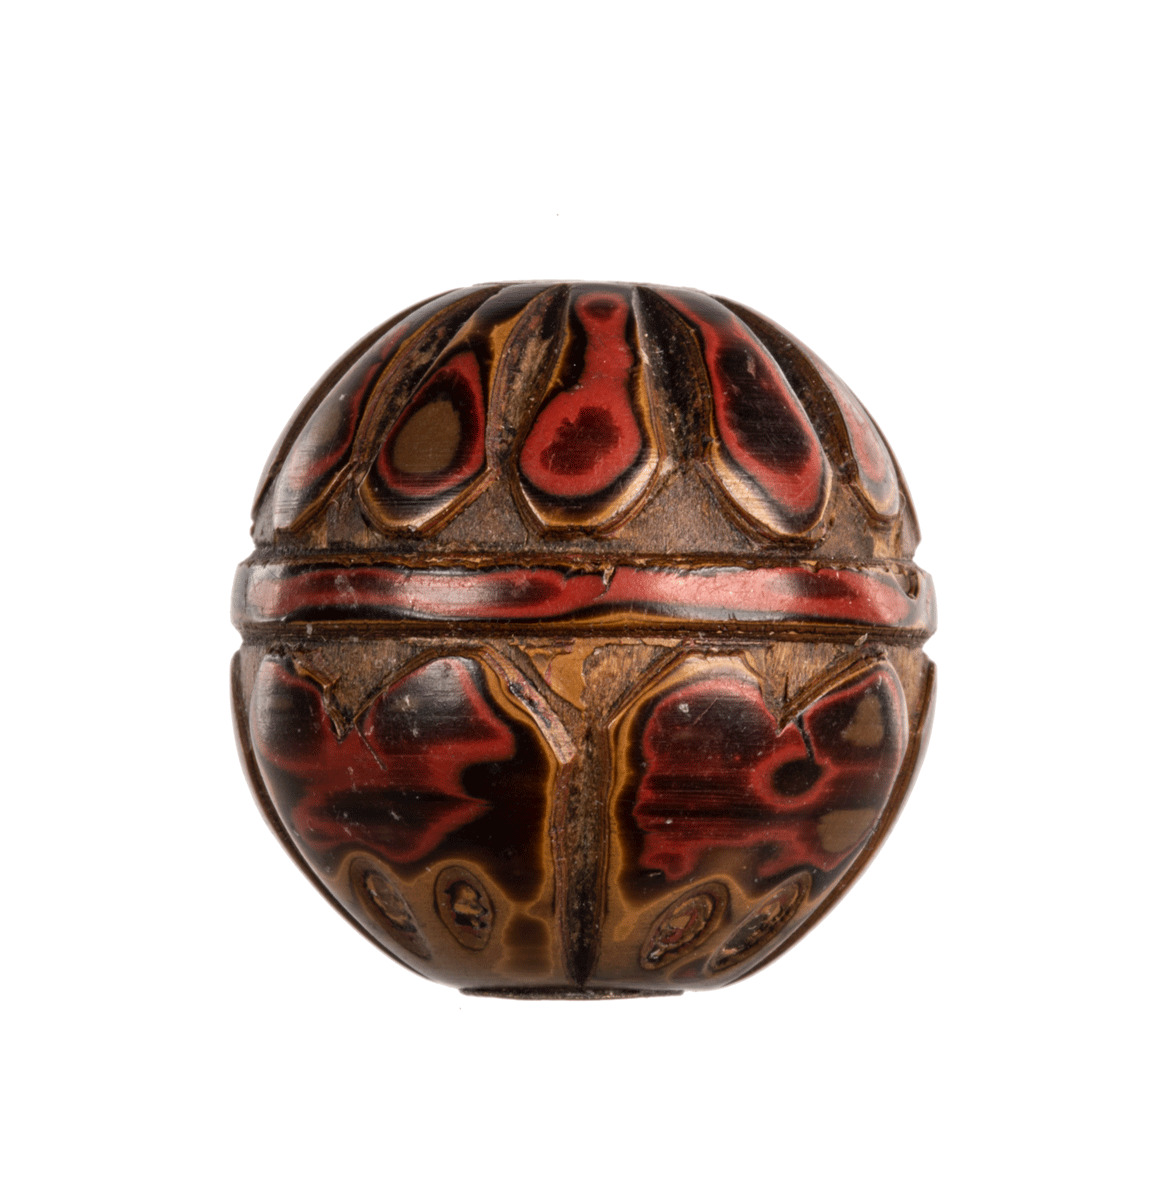 A Lacquer Carved Japanese Meiji Era Ojime Antique Bead